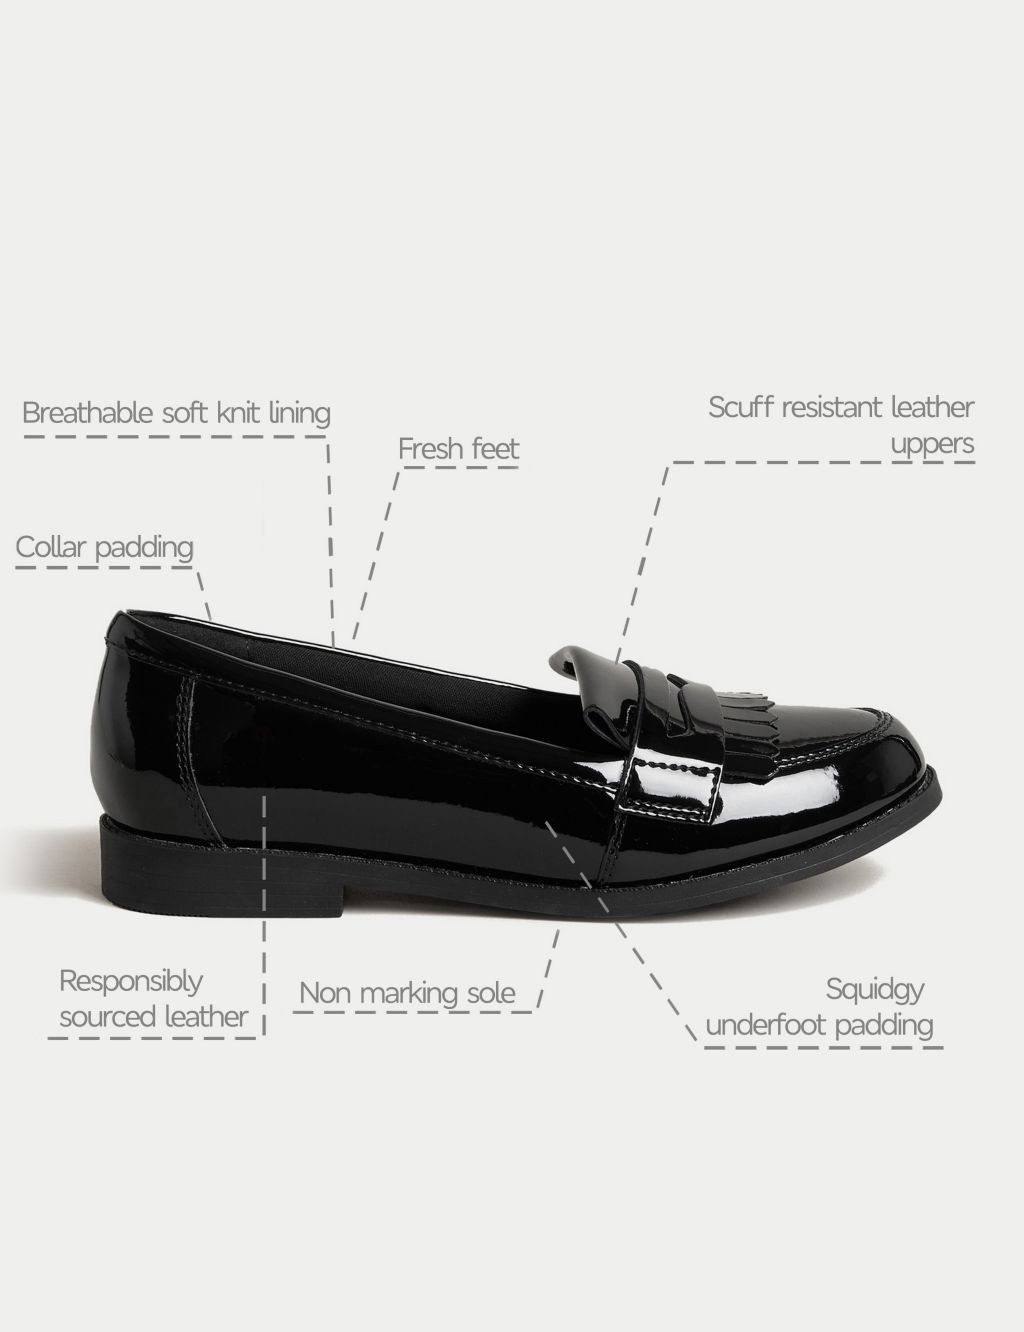 Kids' Leather Freshfeet™ School Shoes (13 Small - 9 Large) image 5